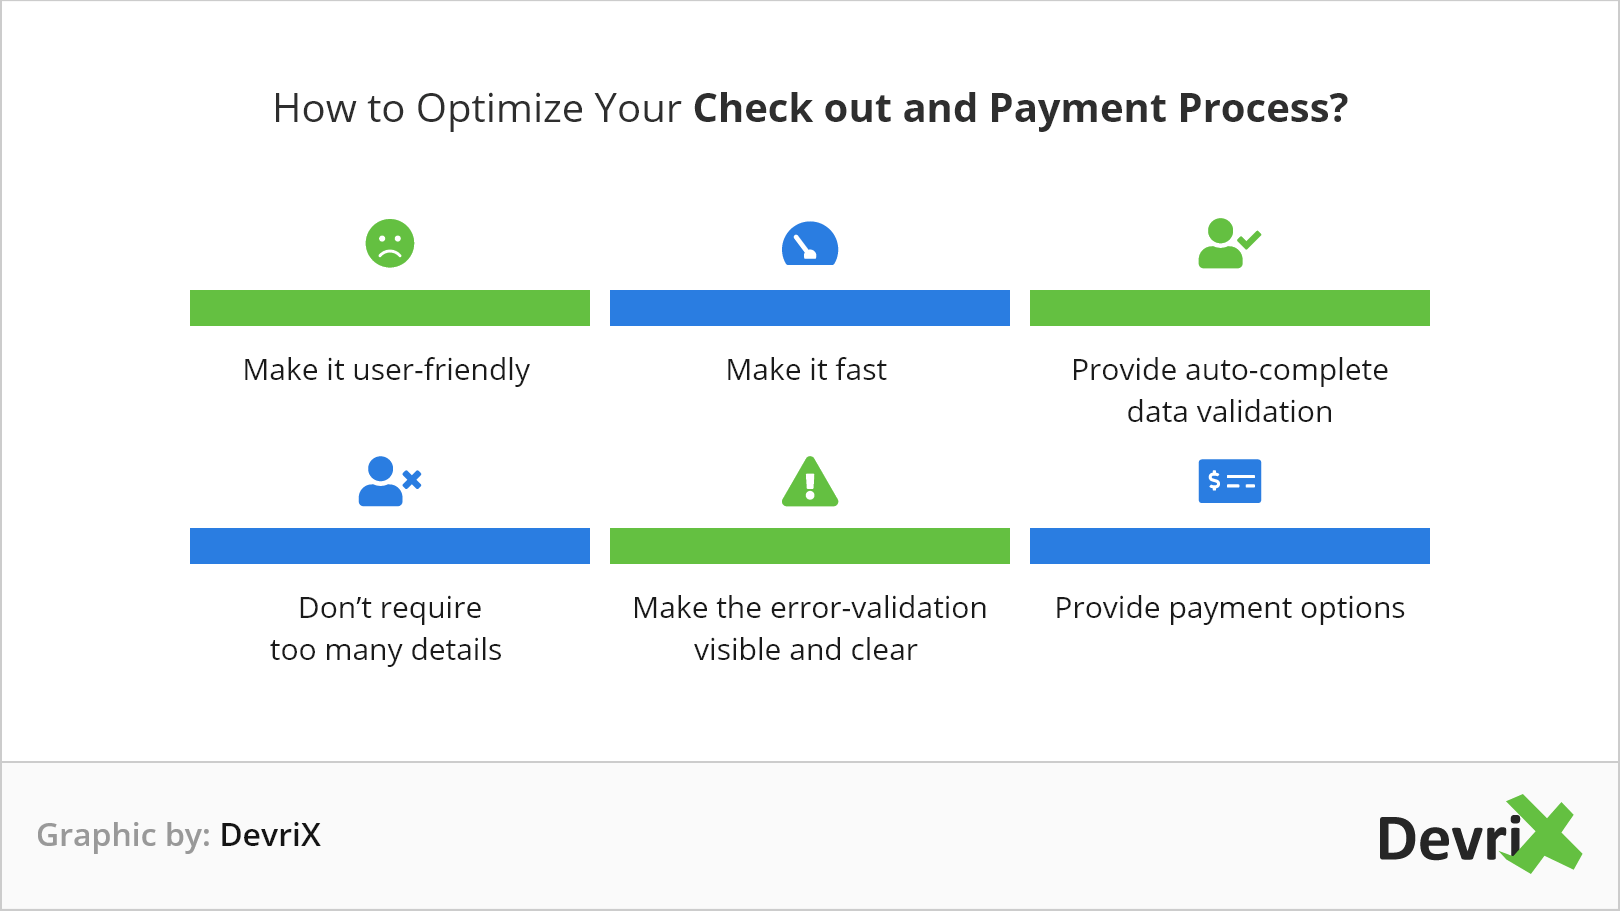 How to optimize your check out and payment process